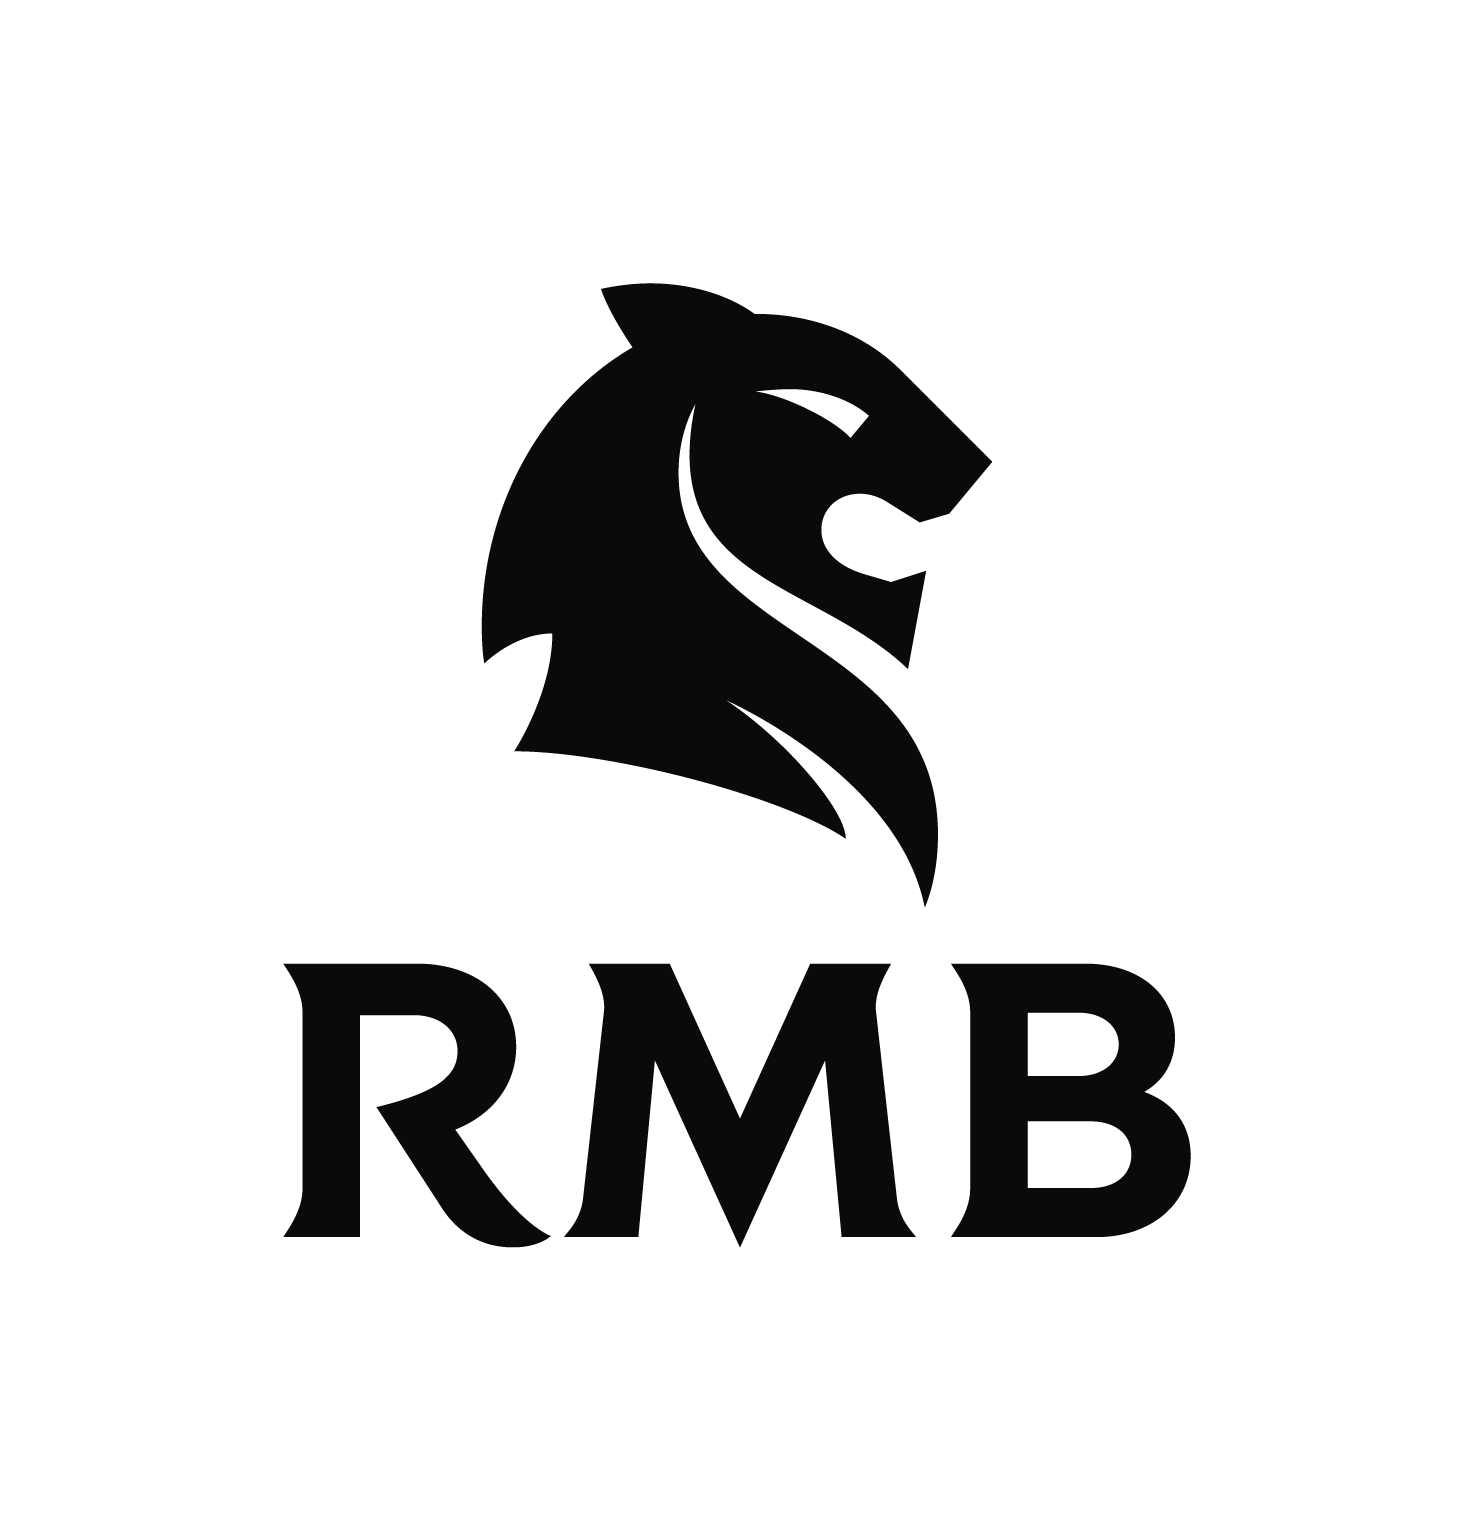 Rand Merchant Bank (RMB) to facilitate business flows into Africa through establishment of United States (US) presence